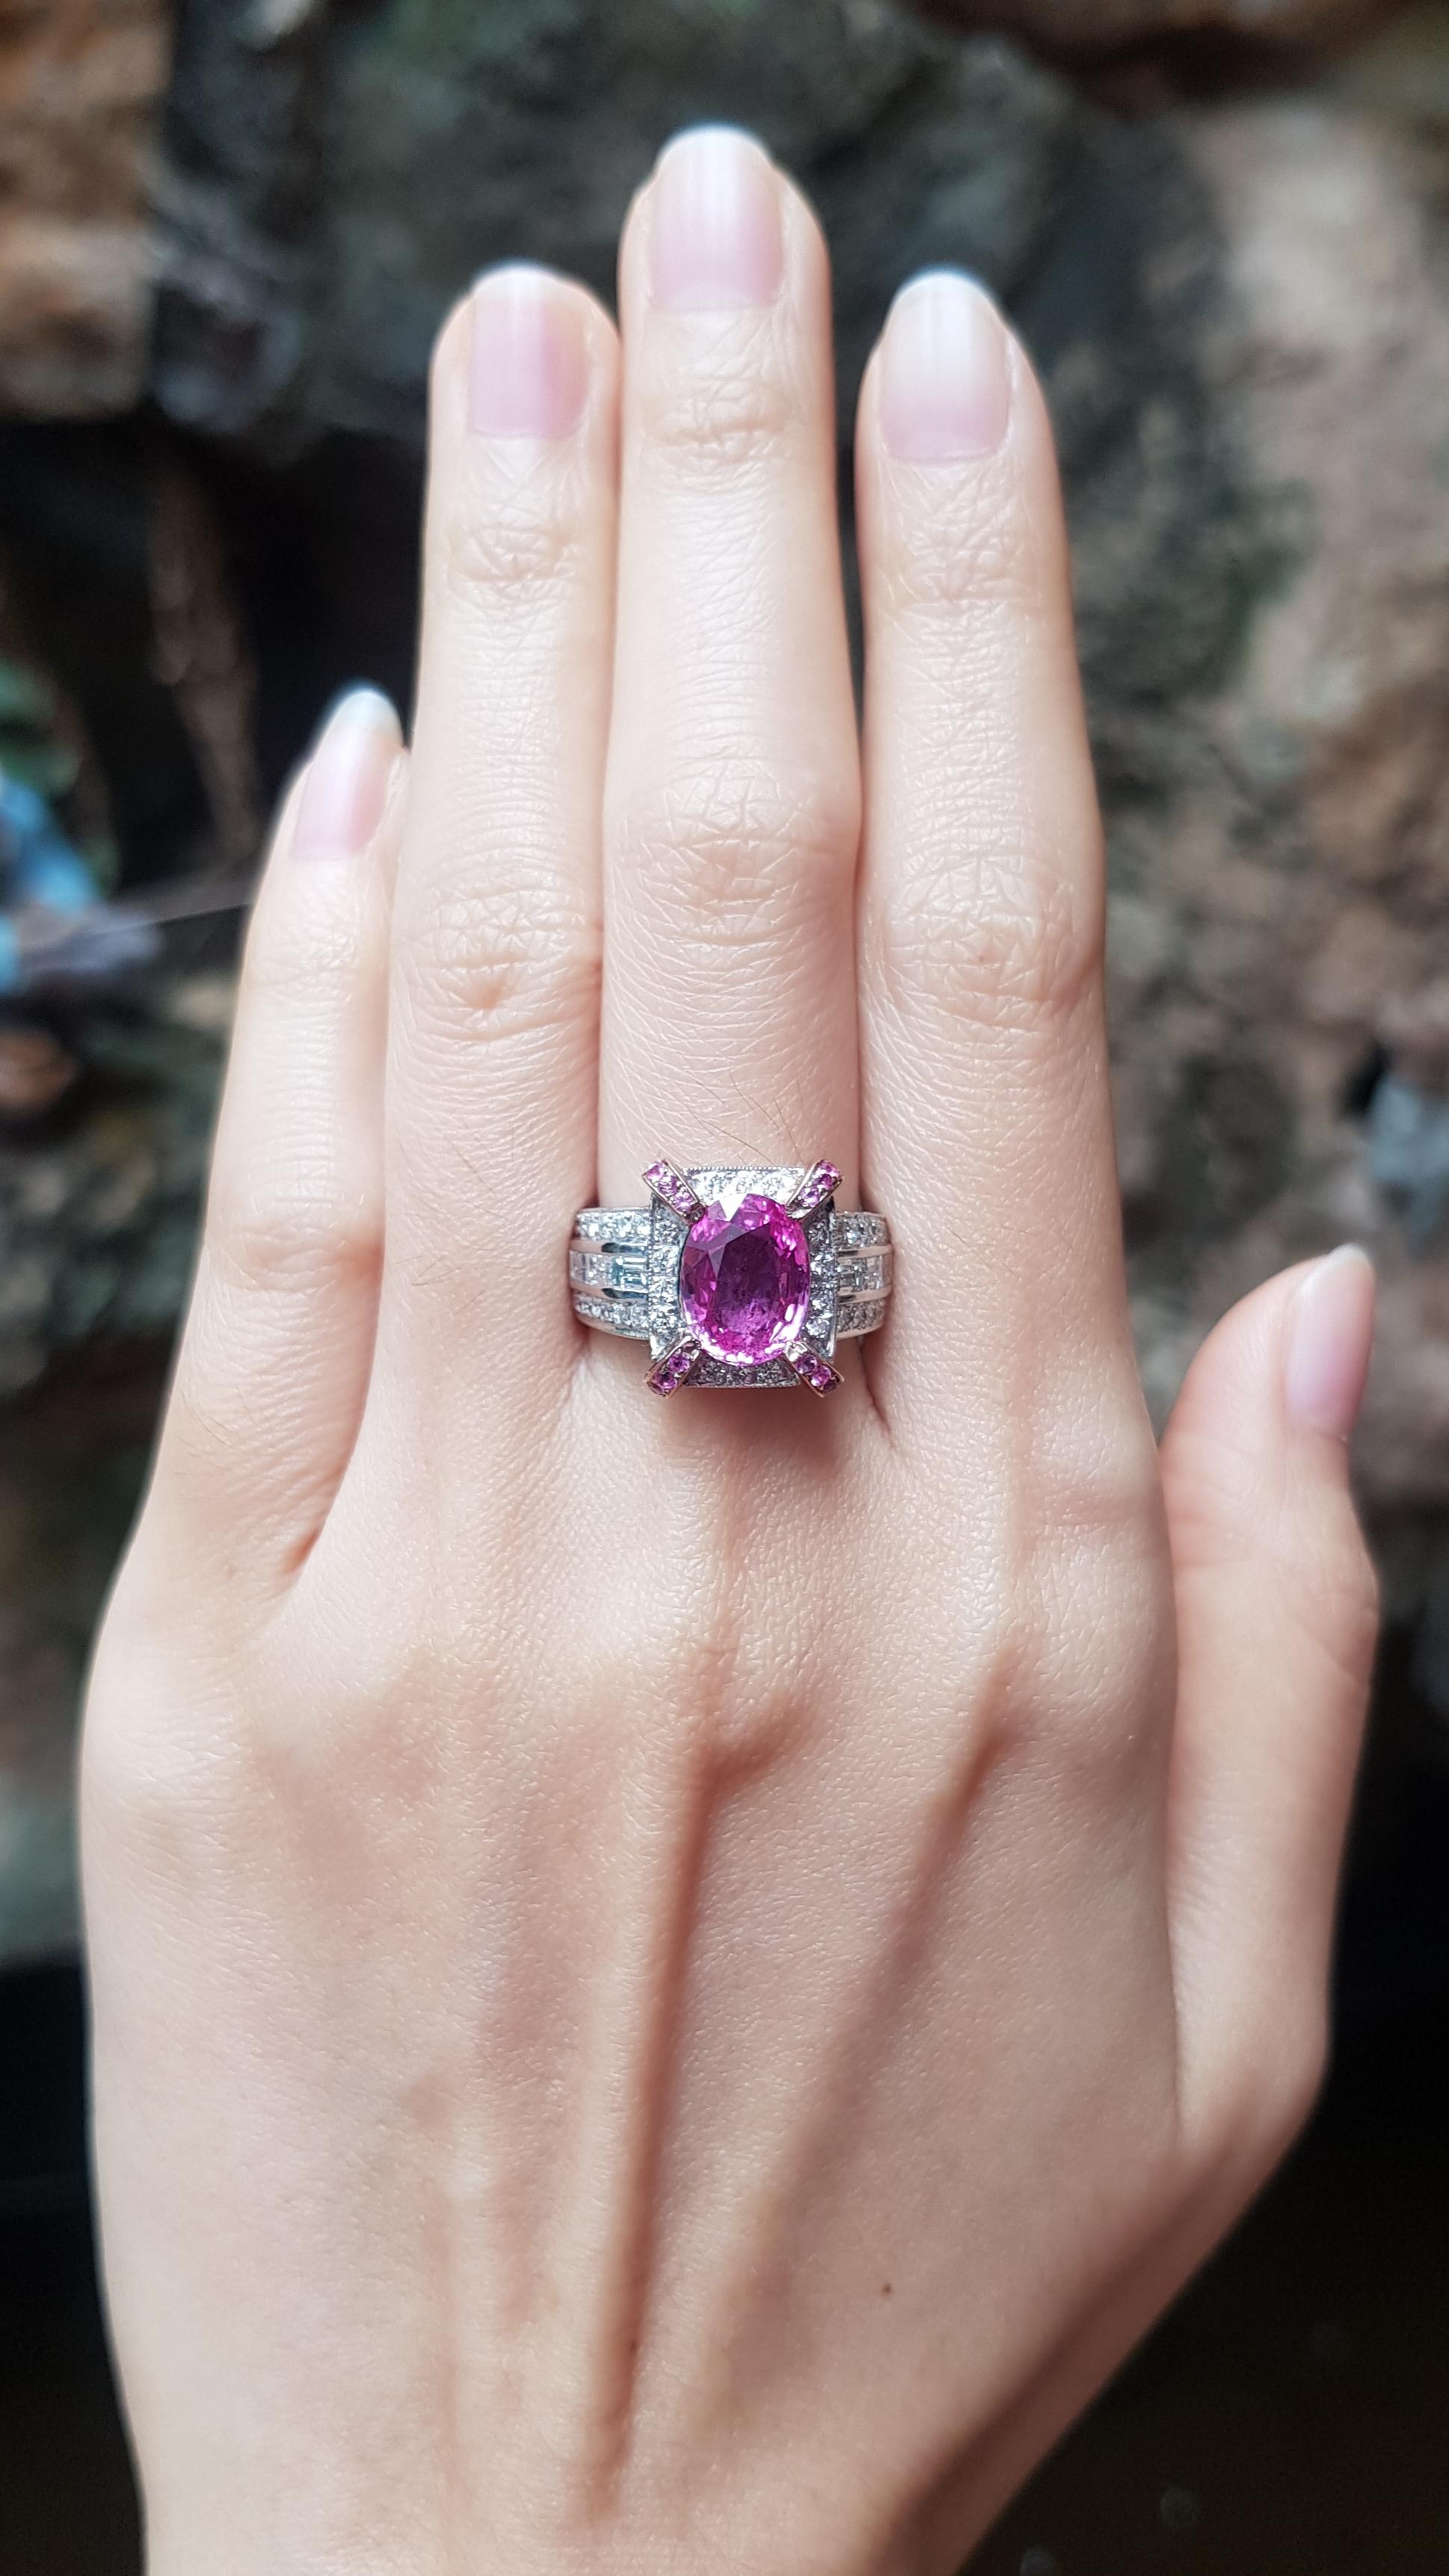 Pink Sapphire 3.33 carats, Pink Sapphire 0.31 carat with Diamond 1.54 carats Ring set in 18 Karat White Gold Settings

Width:  1.1 cm 
Length: 1.3 cm
Ring Size: 52
Total Weight: 10.0 grams

